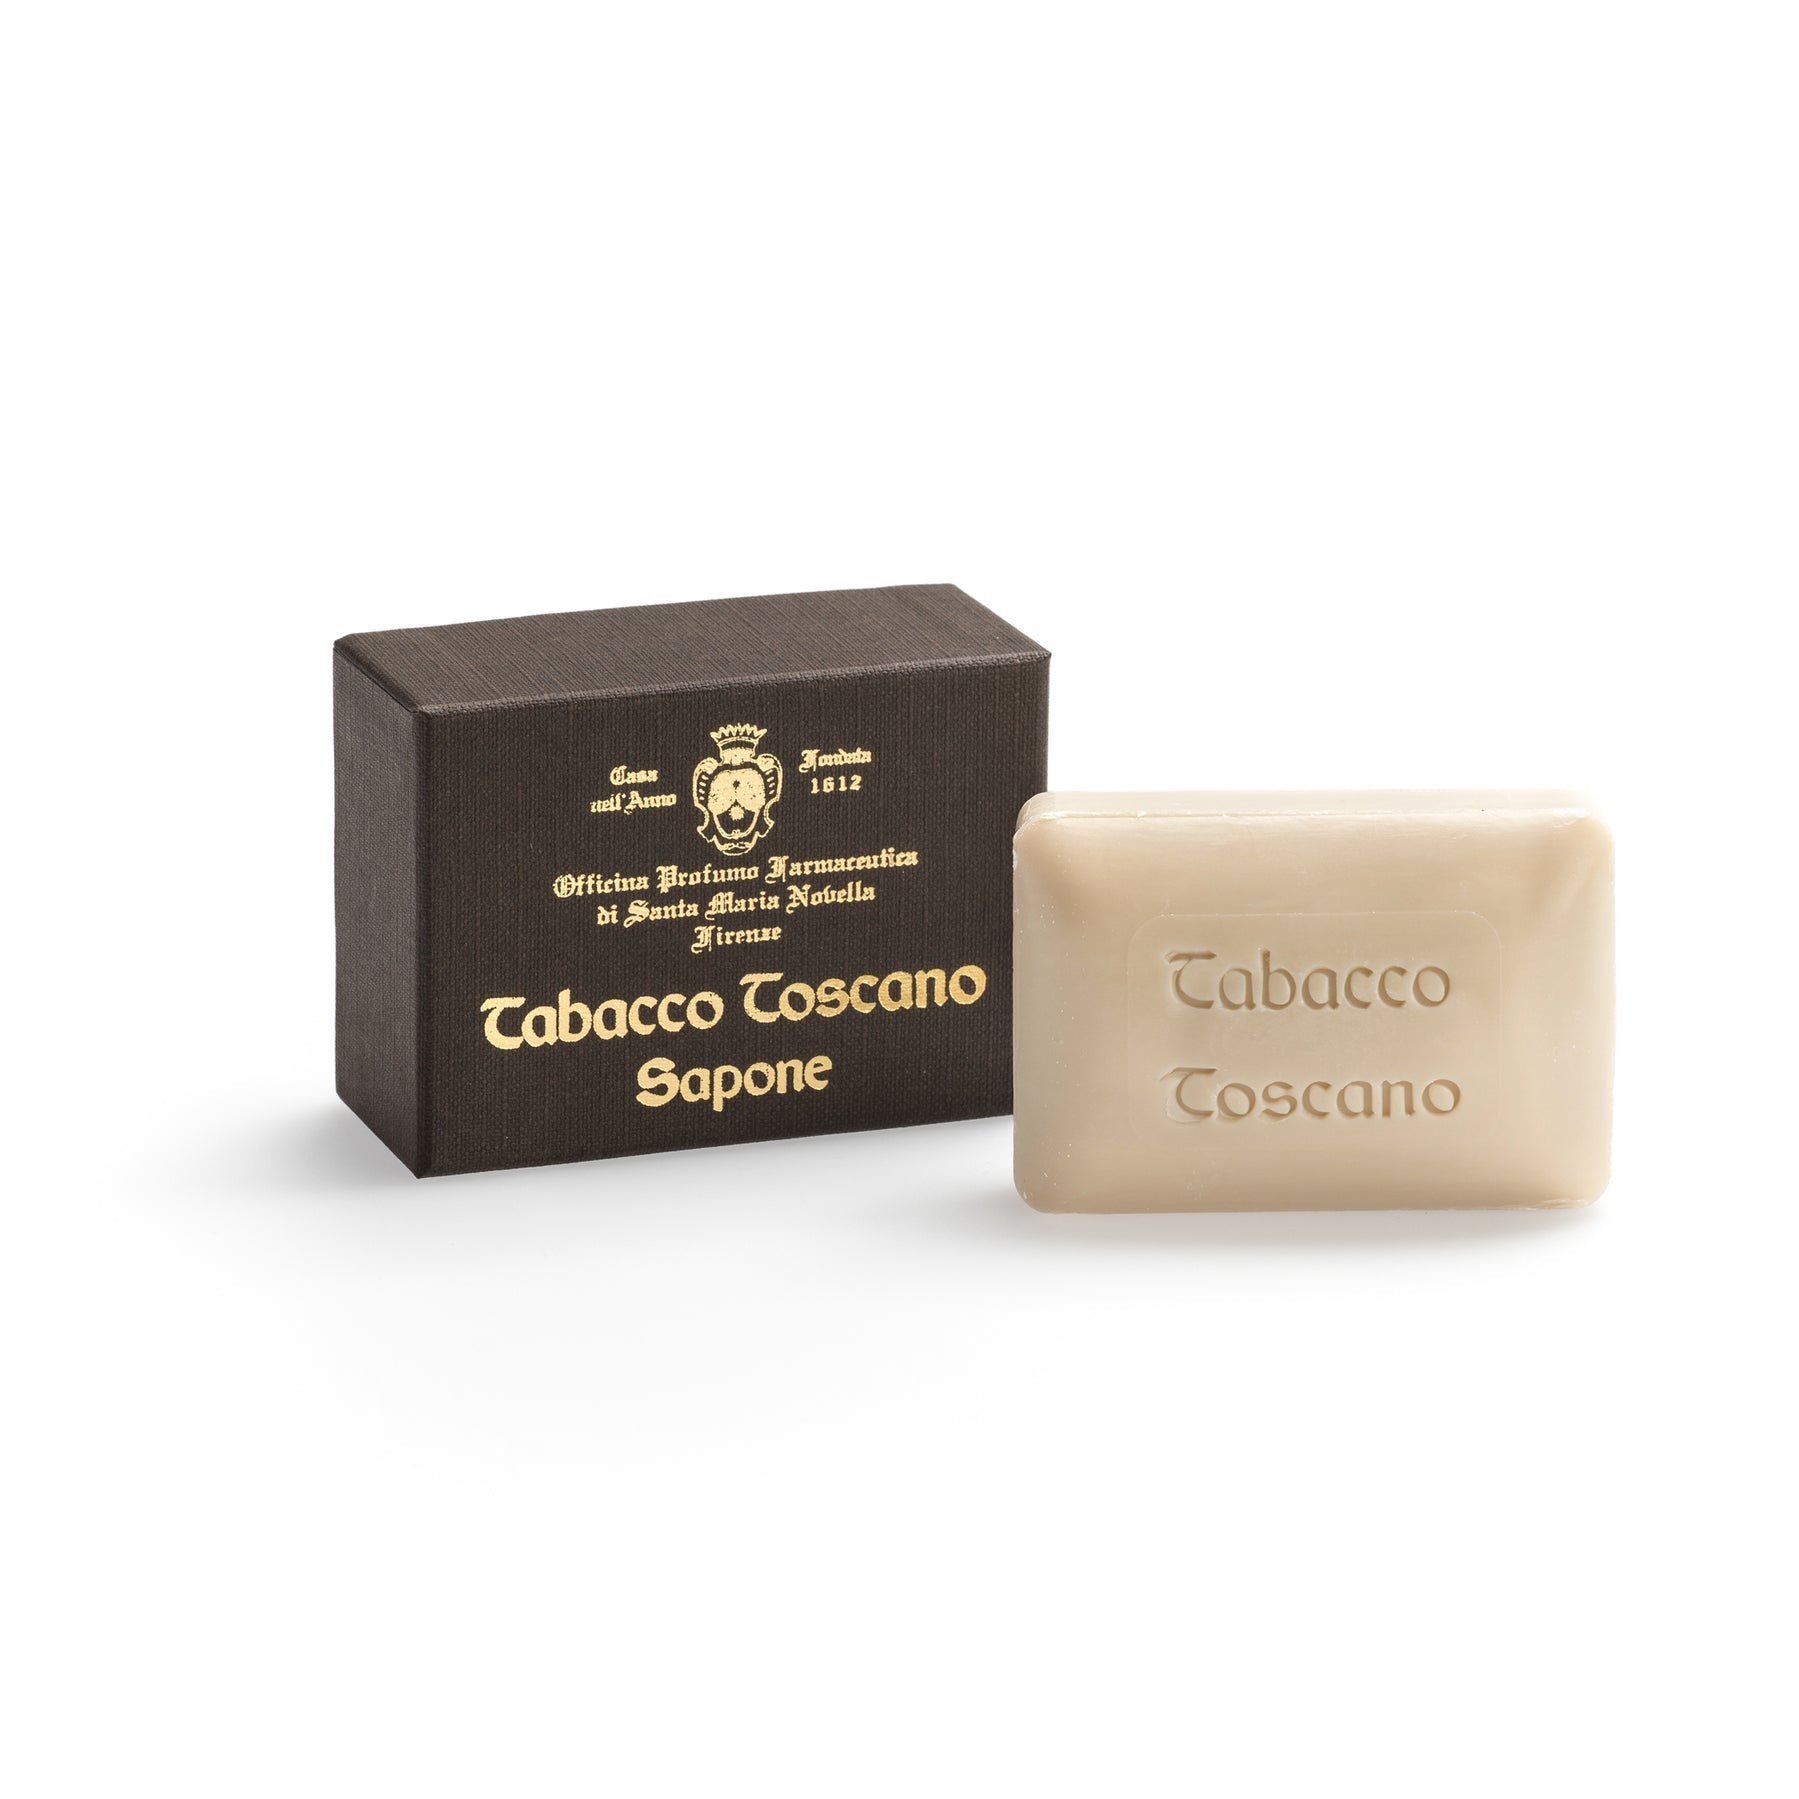 Tabacco Toscano boxed soap. 150gr